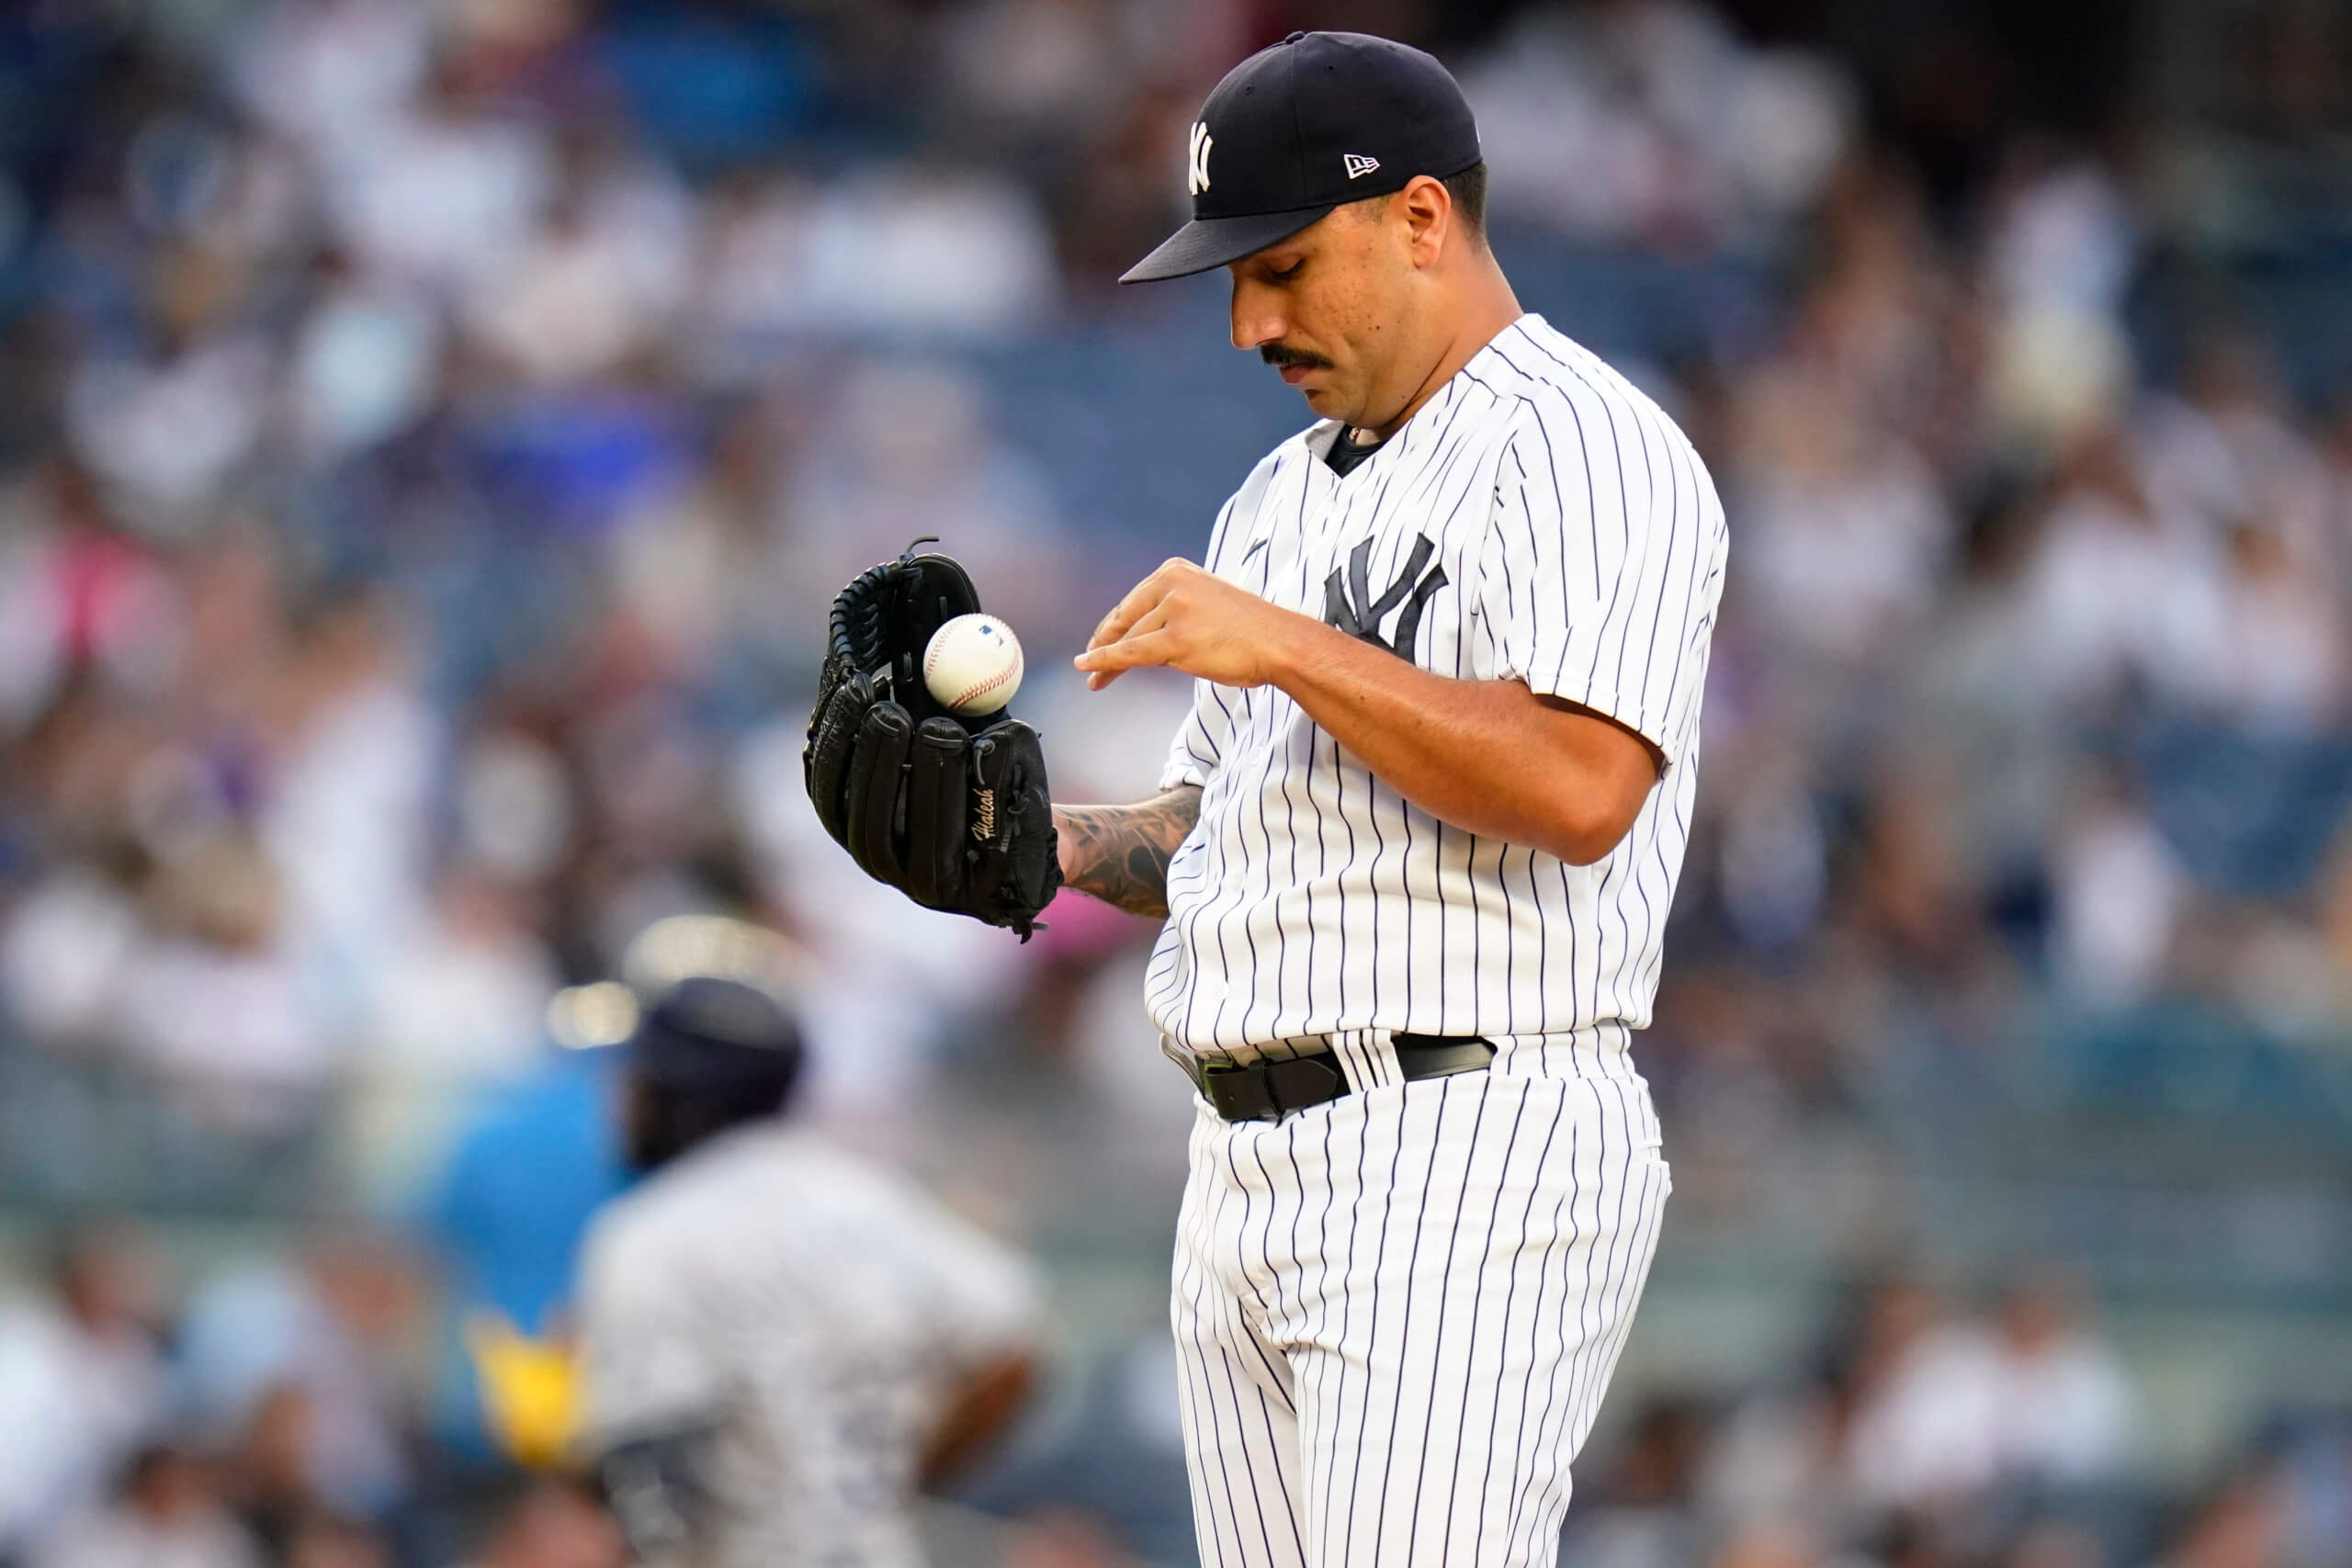 Yankees pitcher Nestor Cortes to return from IL this weekend after